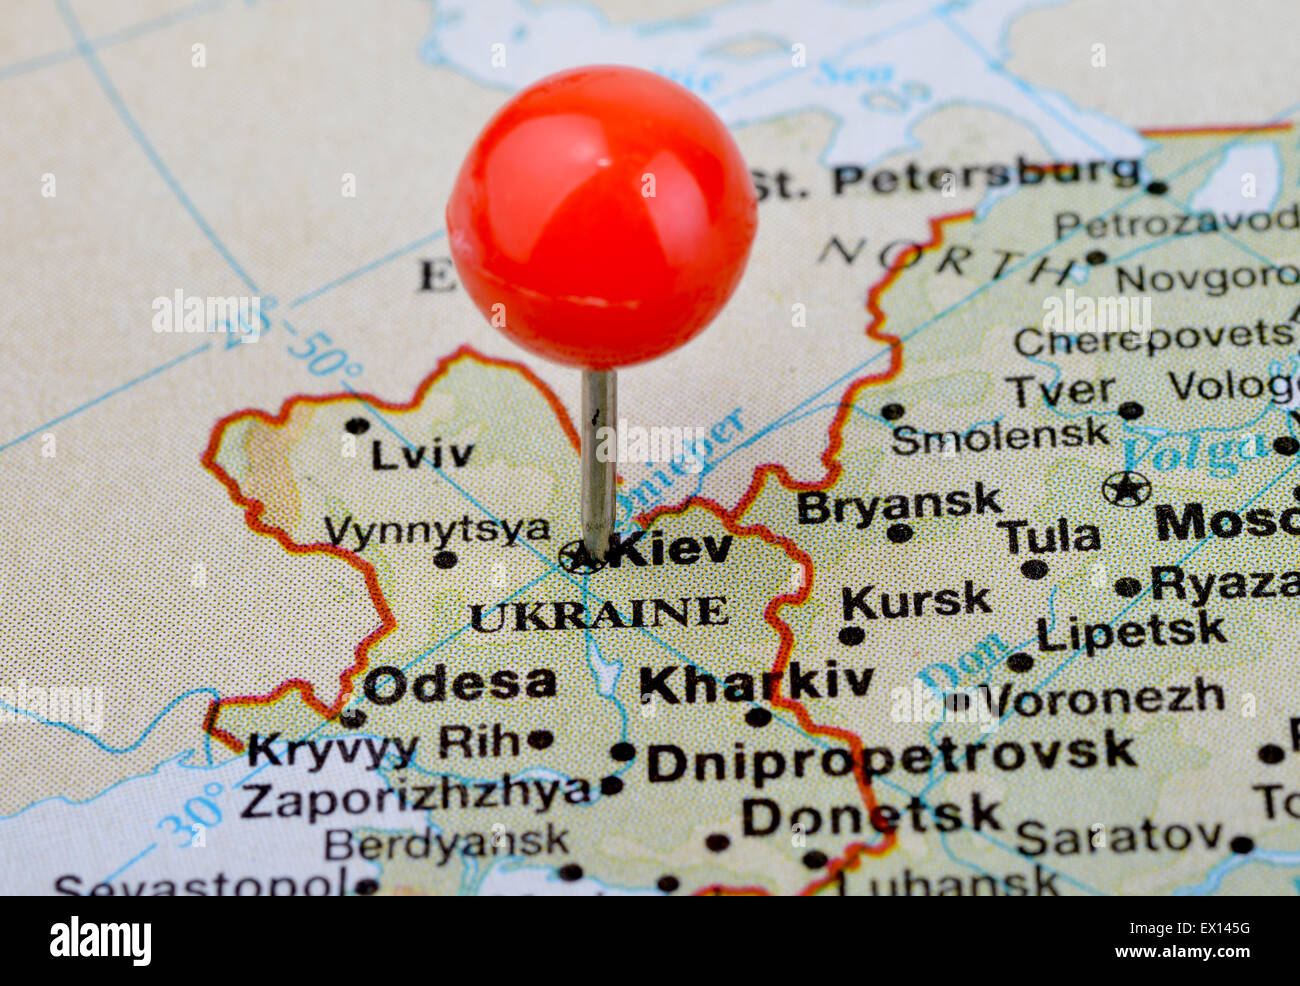 Macro shot of a map showing the city of Kiev the capital of Ukraine Stock Photo